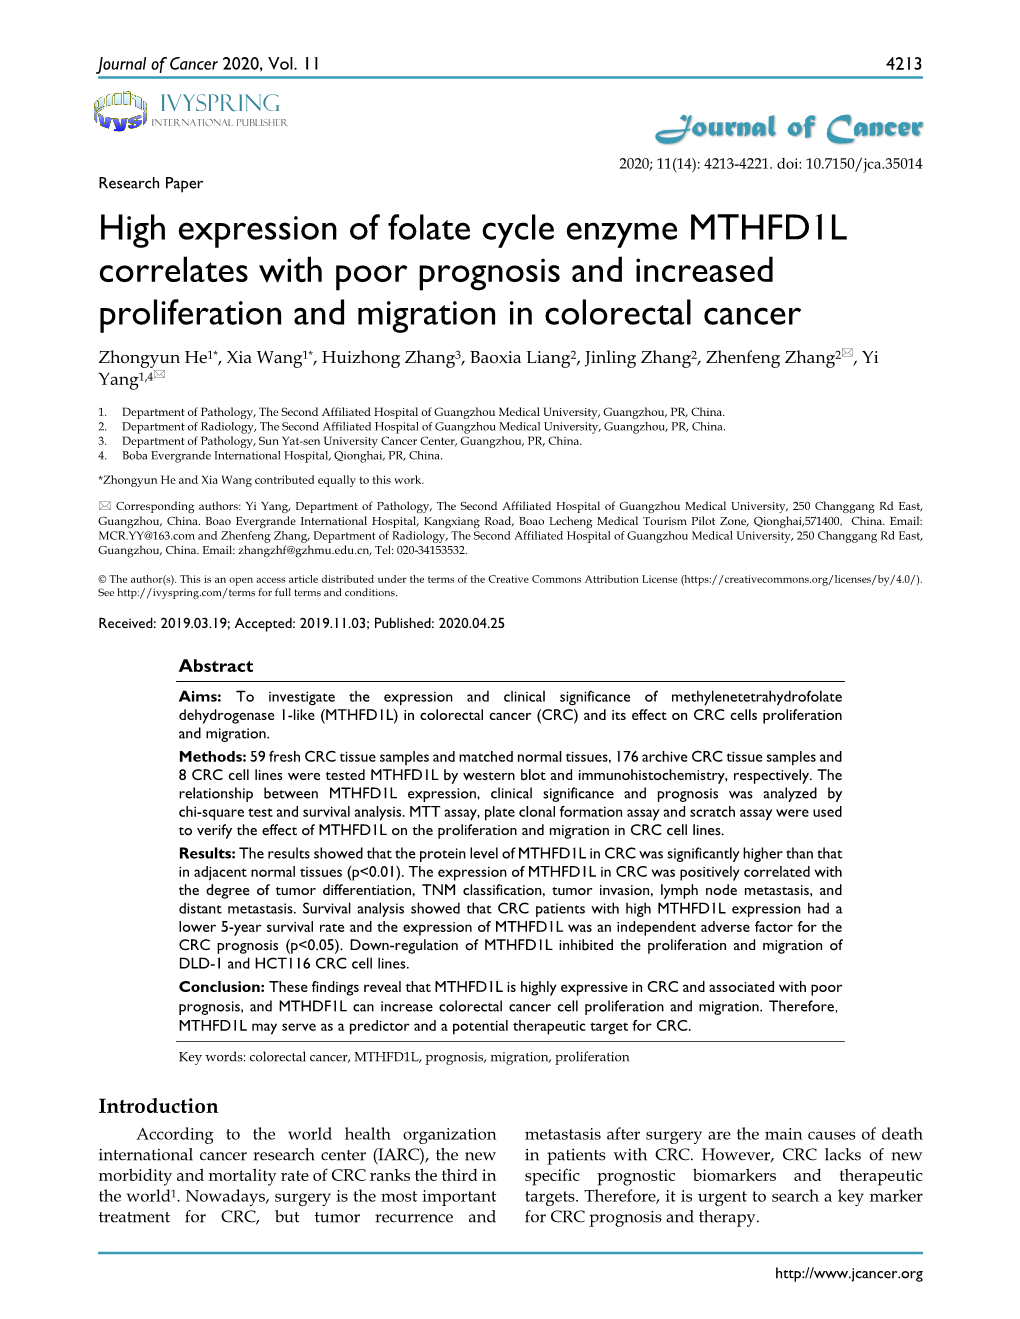 High Expression of Folate Cycle Enzyme MTHFD1L Correlates With